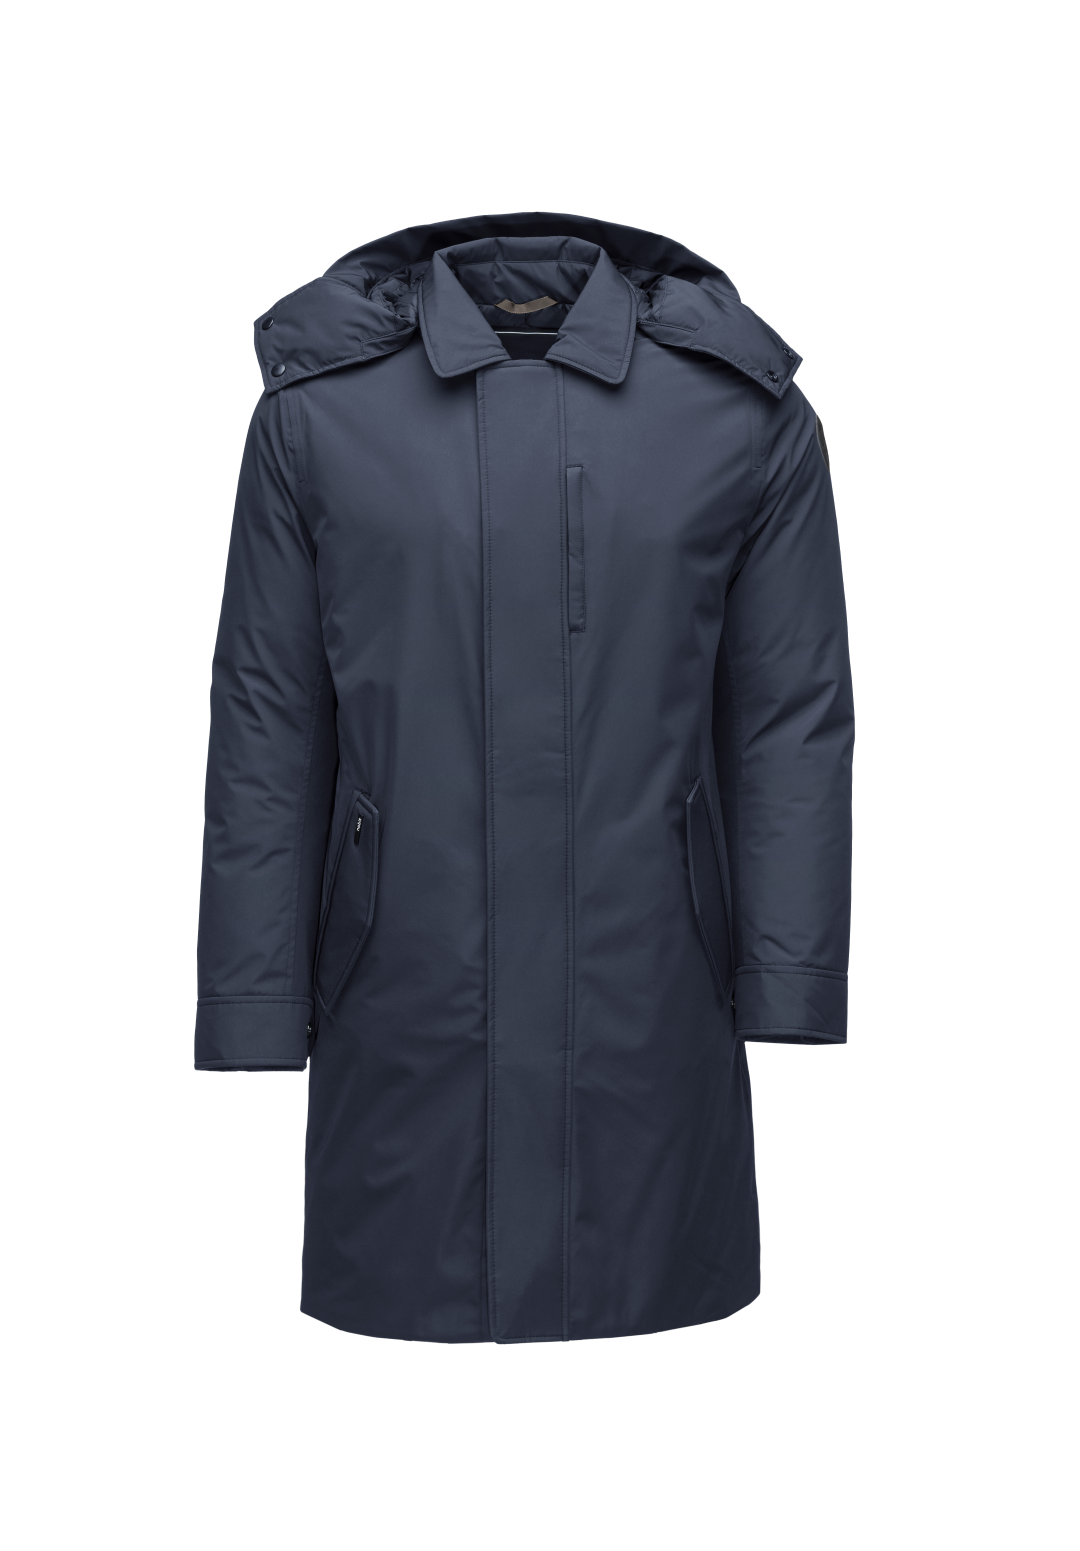 Nord Men's Tailored Trench Coat in knee length, 3-Ply Micro Denier and 4-Way Durable Stretch Weave fabrication, Premium Canadian White Duck Down insulation, removable down-filled hood, exterior zipper pocket at left chest, and adjustable snap button cuffs, in Marine